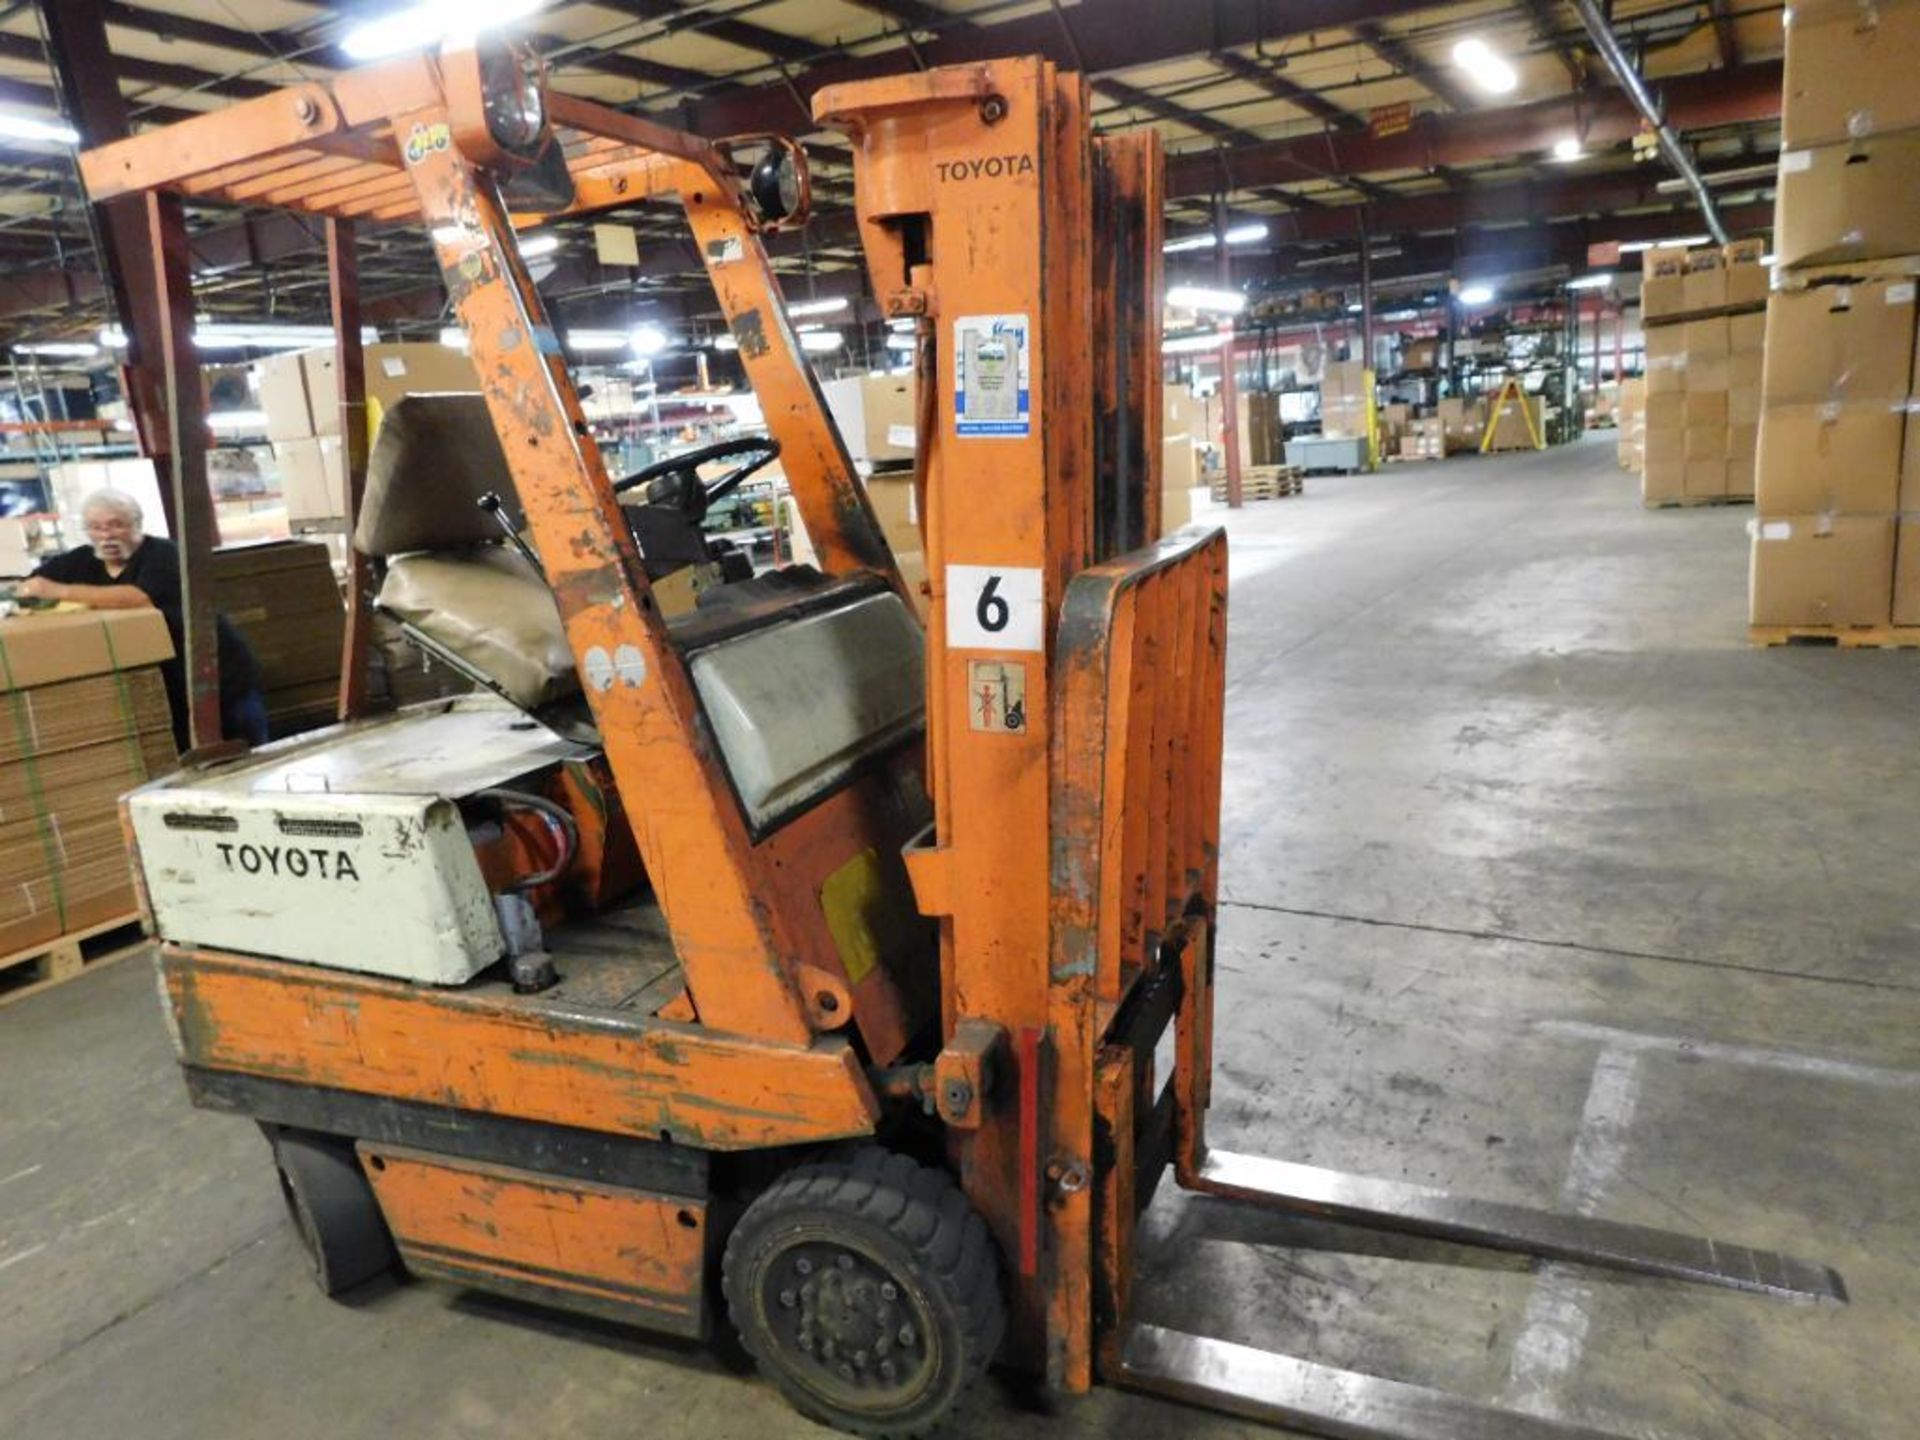 Toyota 2640 lb. Electric Forklift Model 2FBCA15, S/N 13236 (1989), Solid Tires, Overhead Guard, - Image 2 of 2